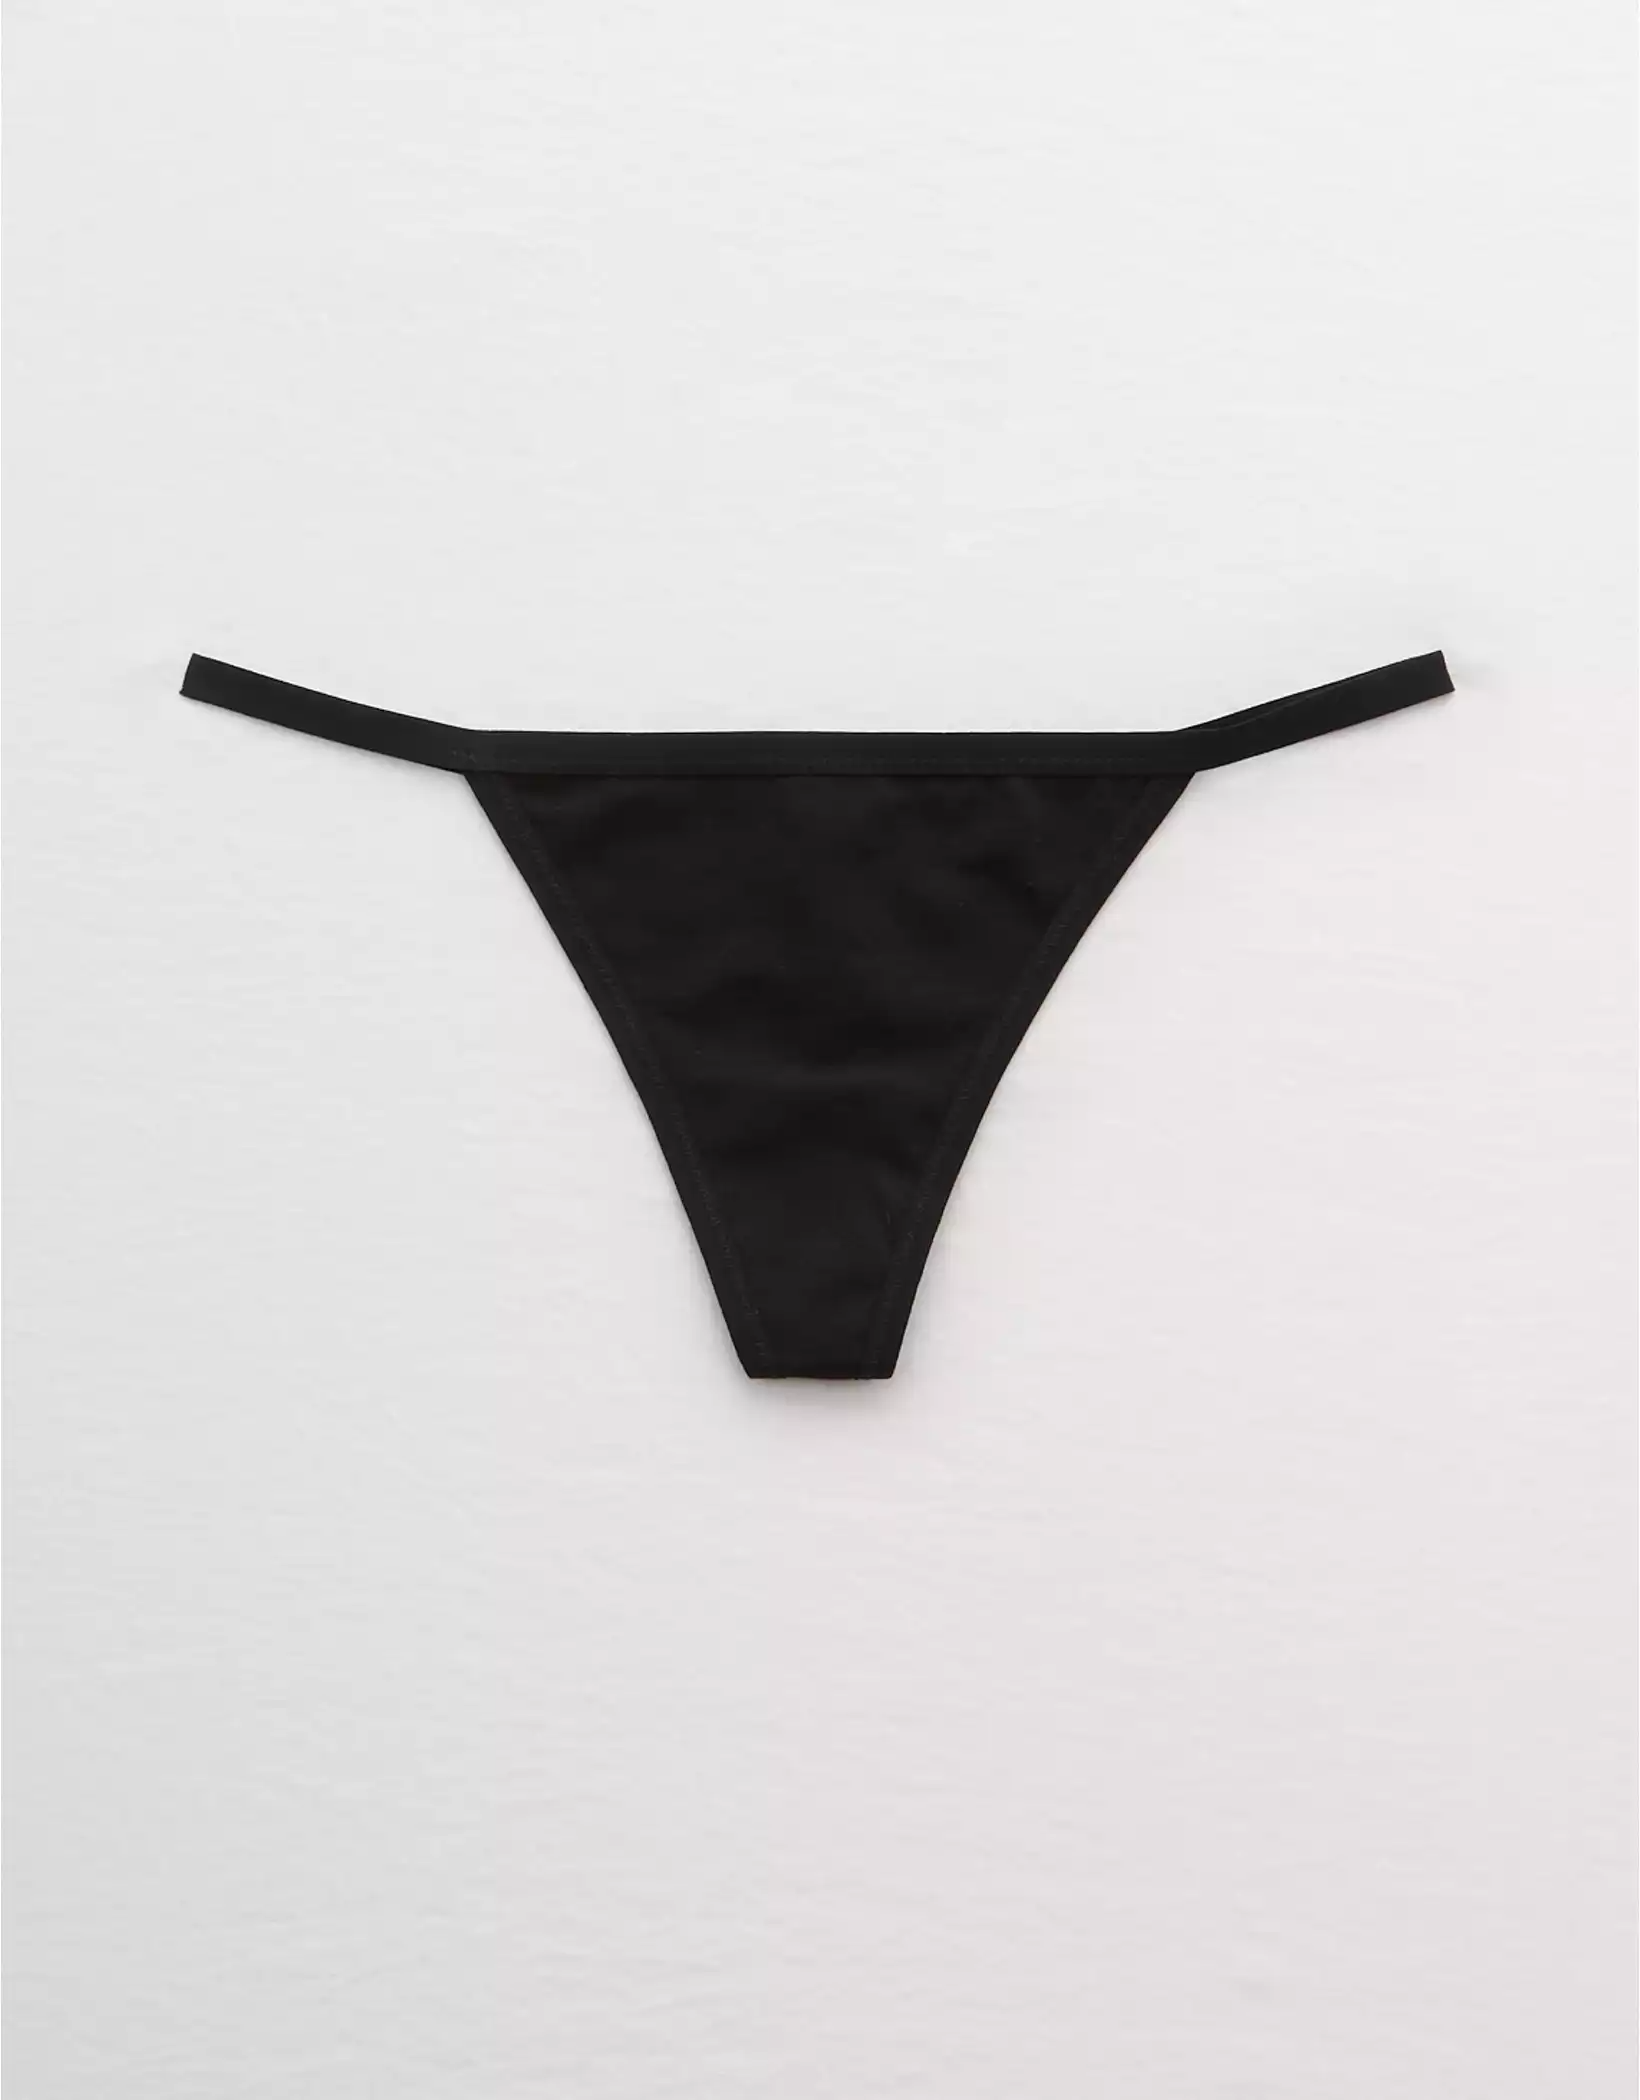  STUFF WITH ATTITUDE Open for Business Black Thong